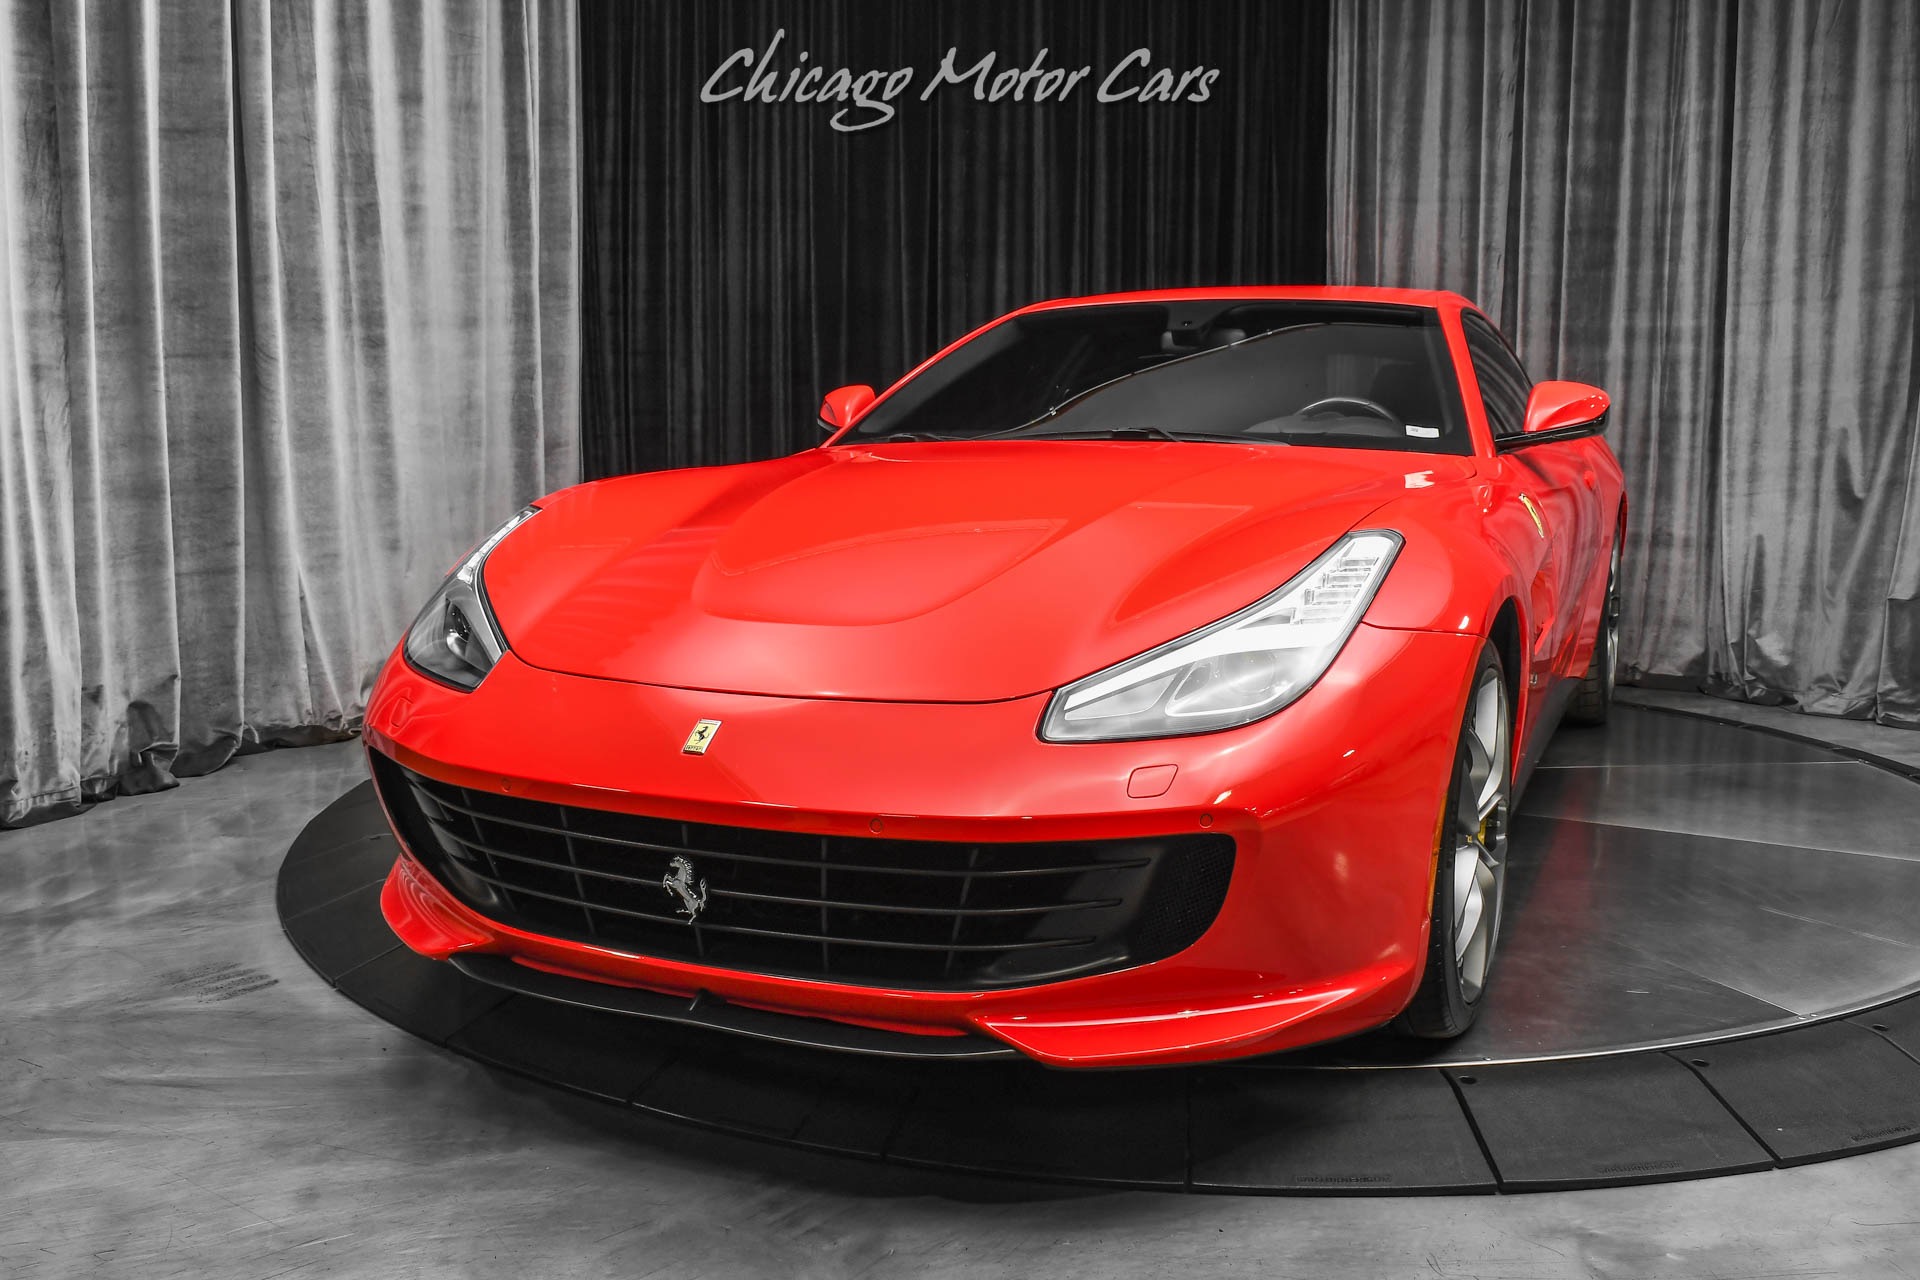 Used-2018-Ferrari-GTC4Lusso-T-LOW-Miles-Carbon-Driver-Zone-Passenger-Display-Front-Lift-RARE